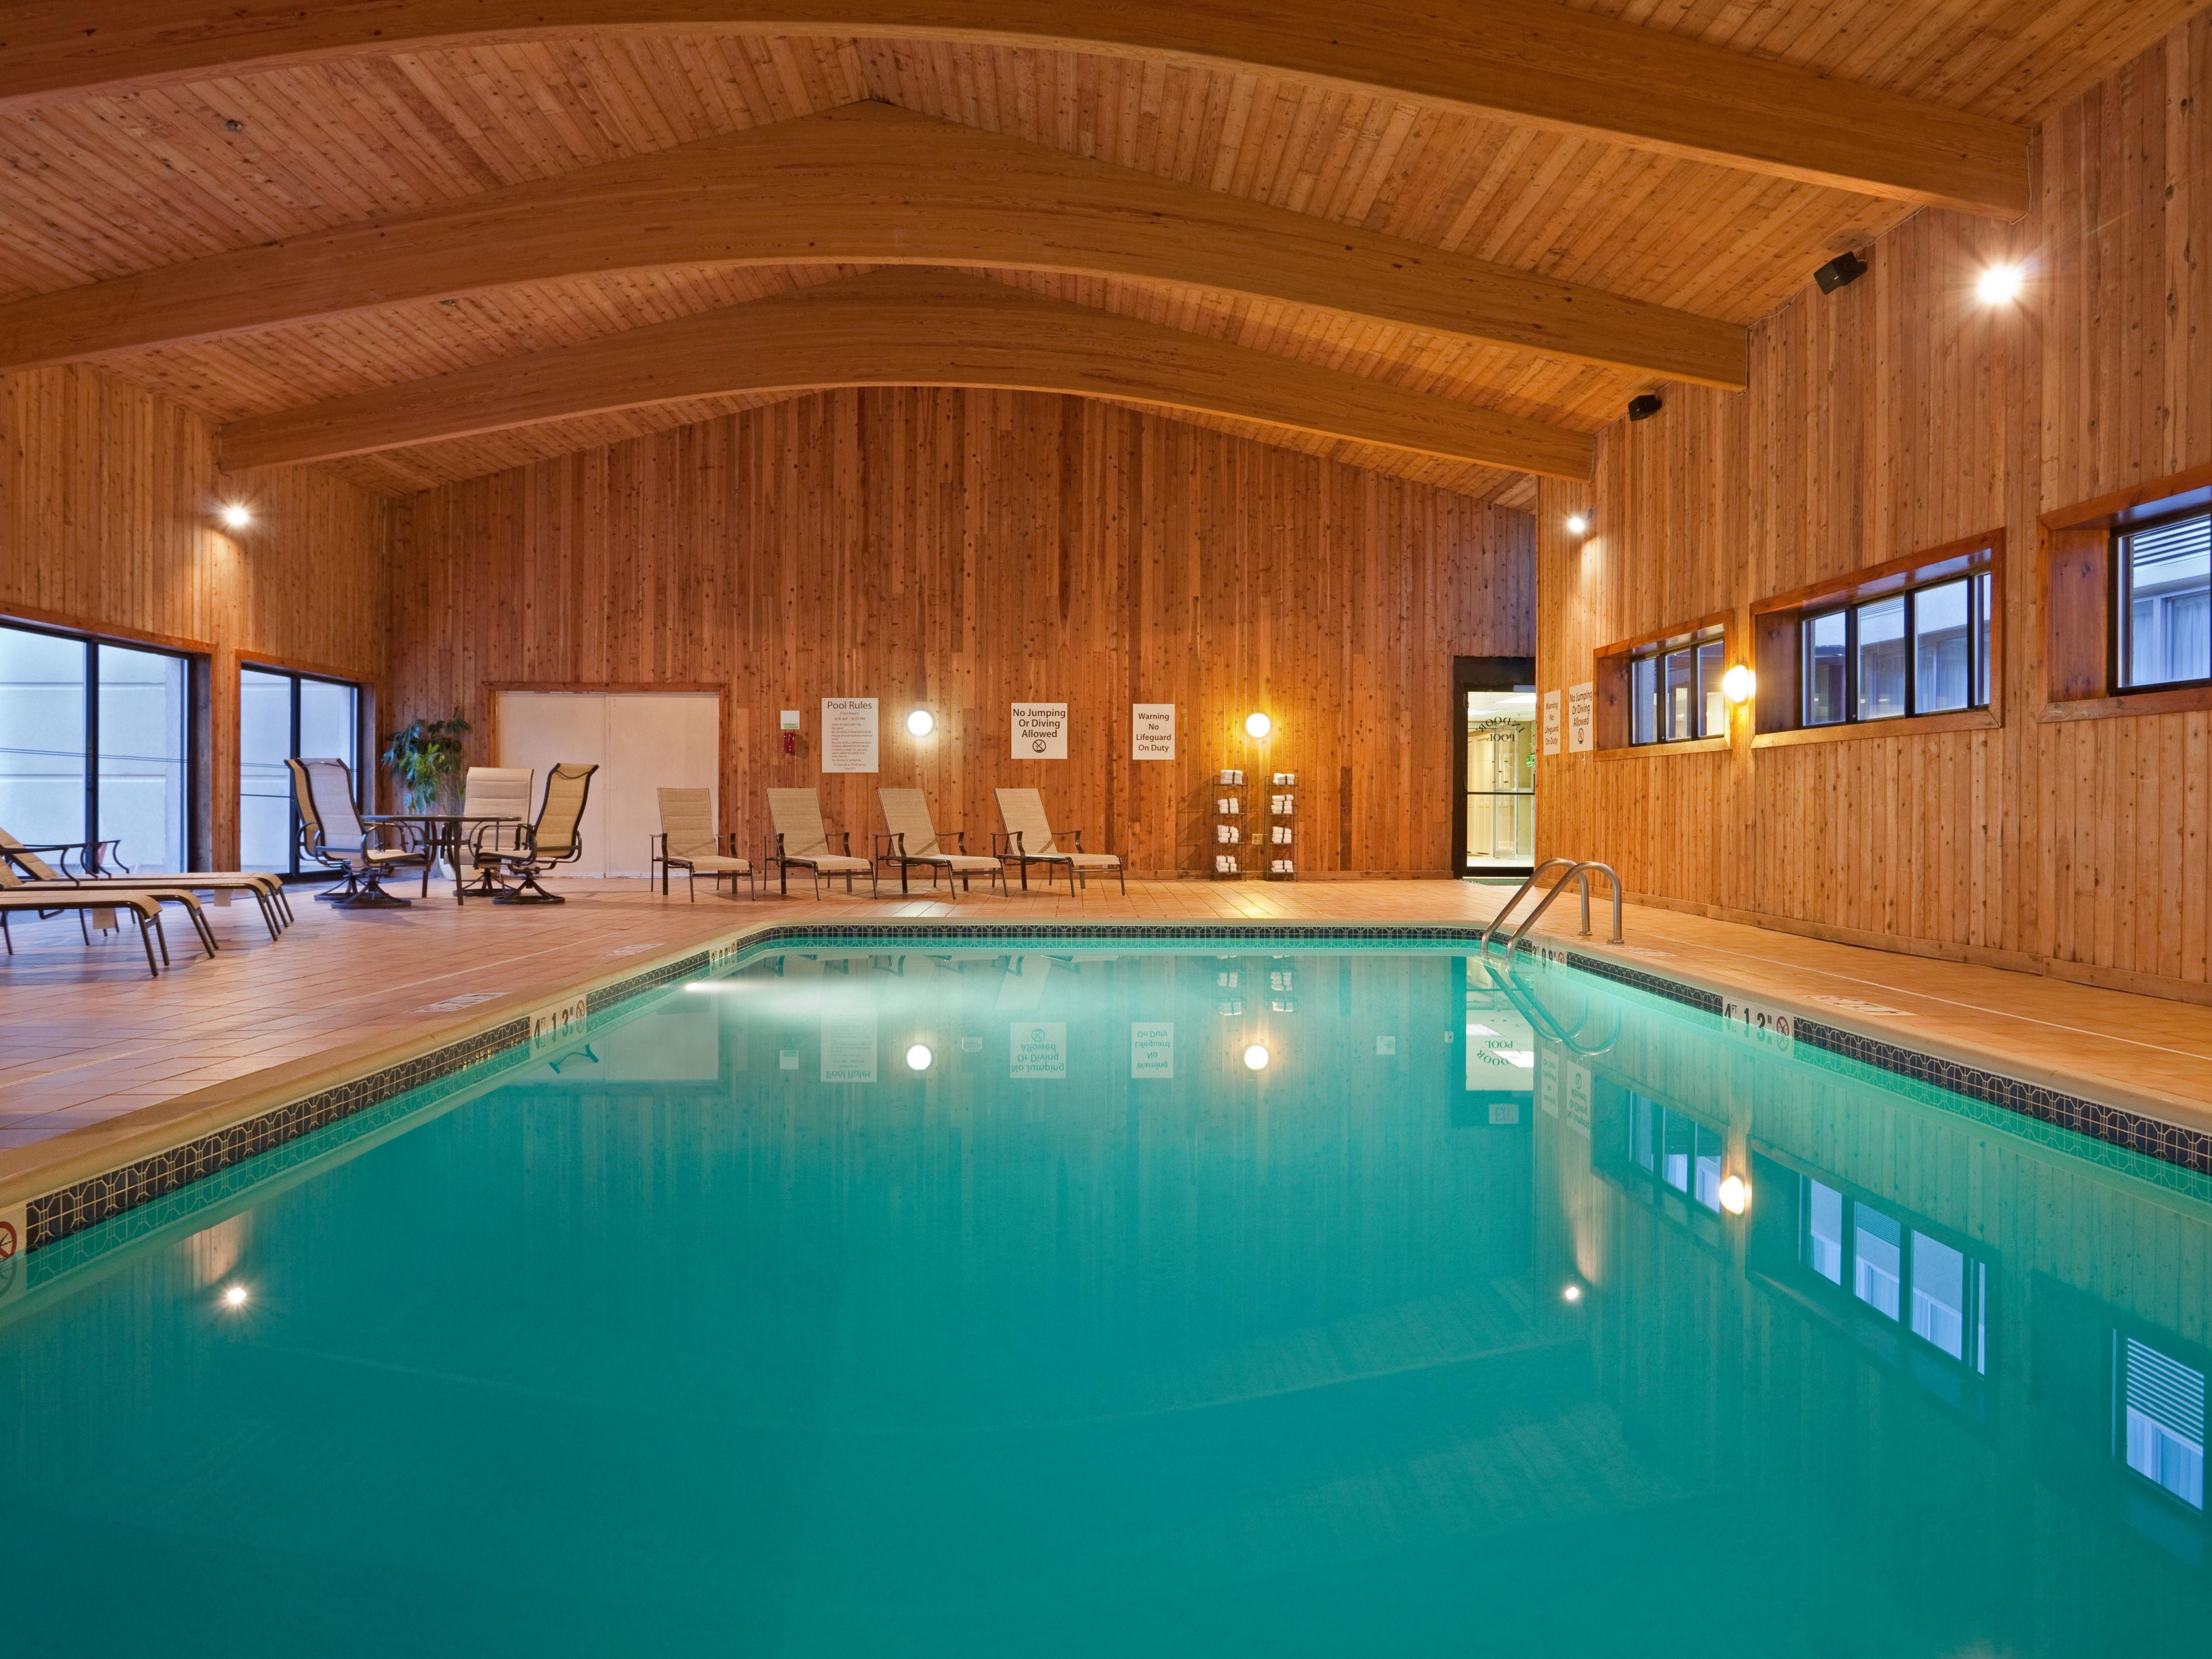 We have the largest indoor pool in Marlborough. Join us for an afternoon swim. 